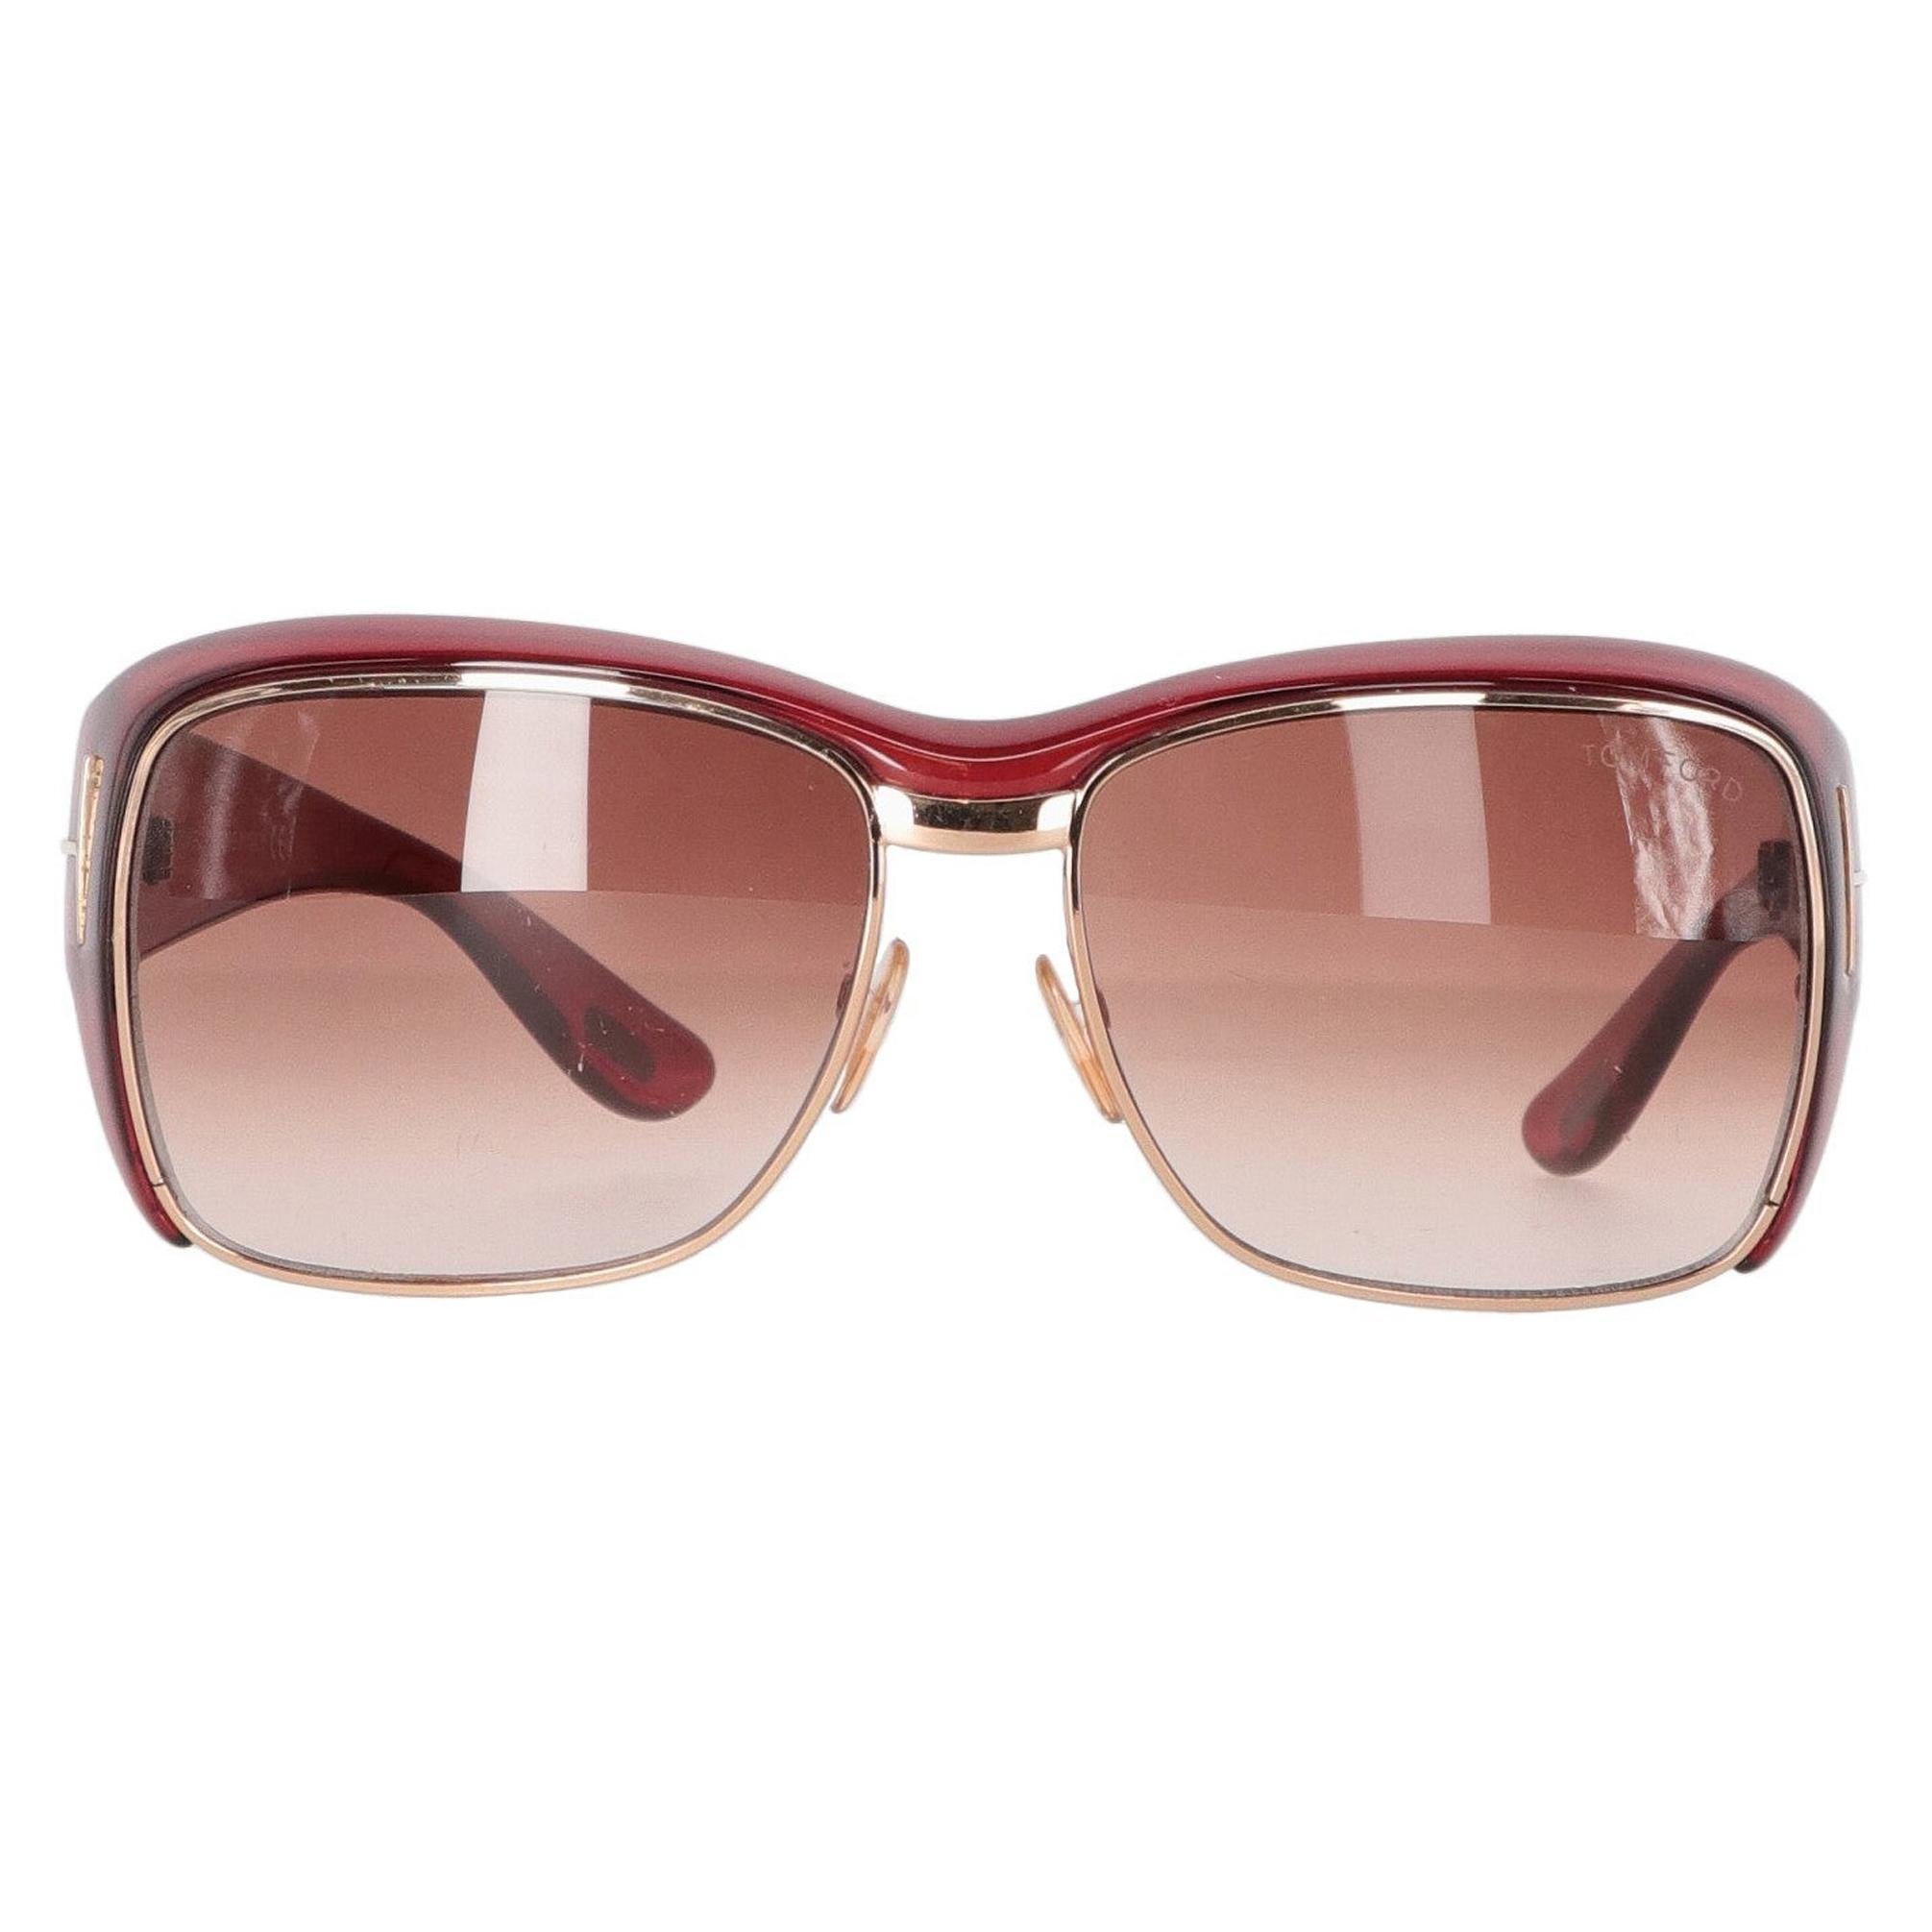 2010s Tom Ford Red Sunglasses For Sale